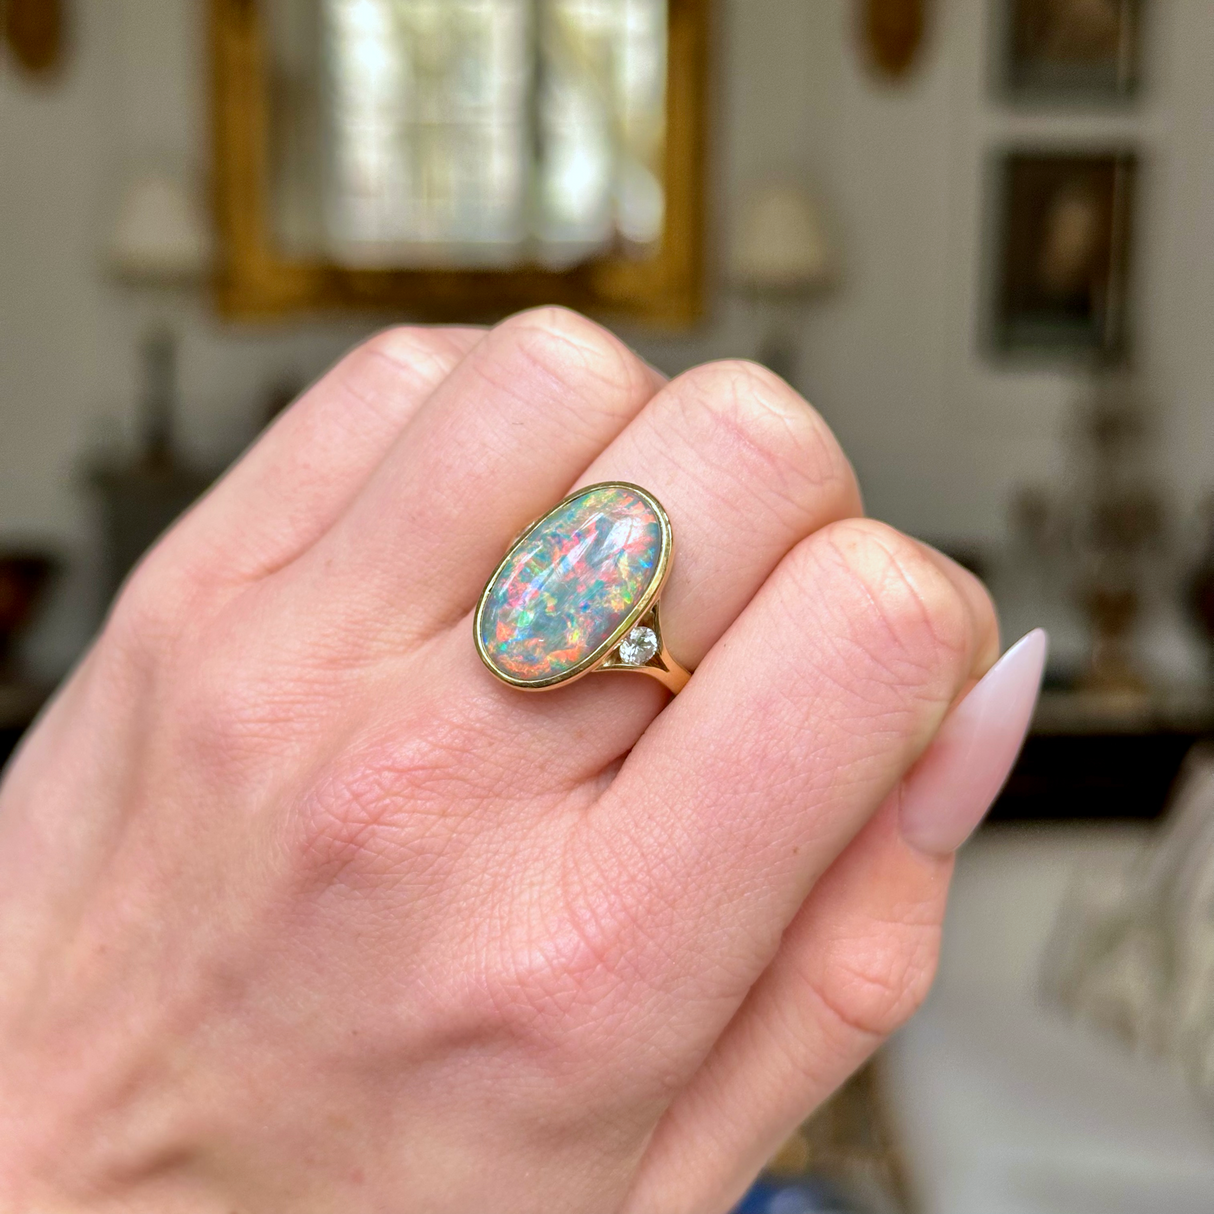 Contemporary, Black Opal and Diamond Cocktail Ring, worn on closed hand.